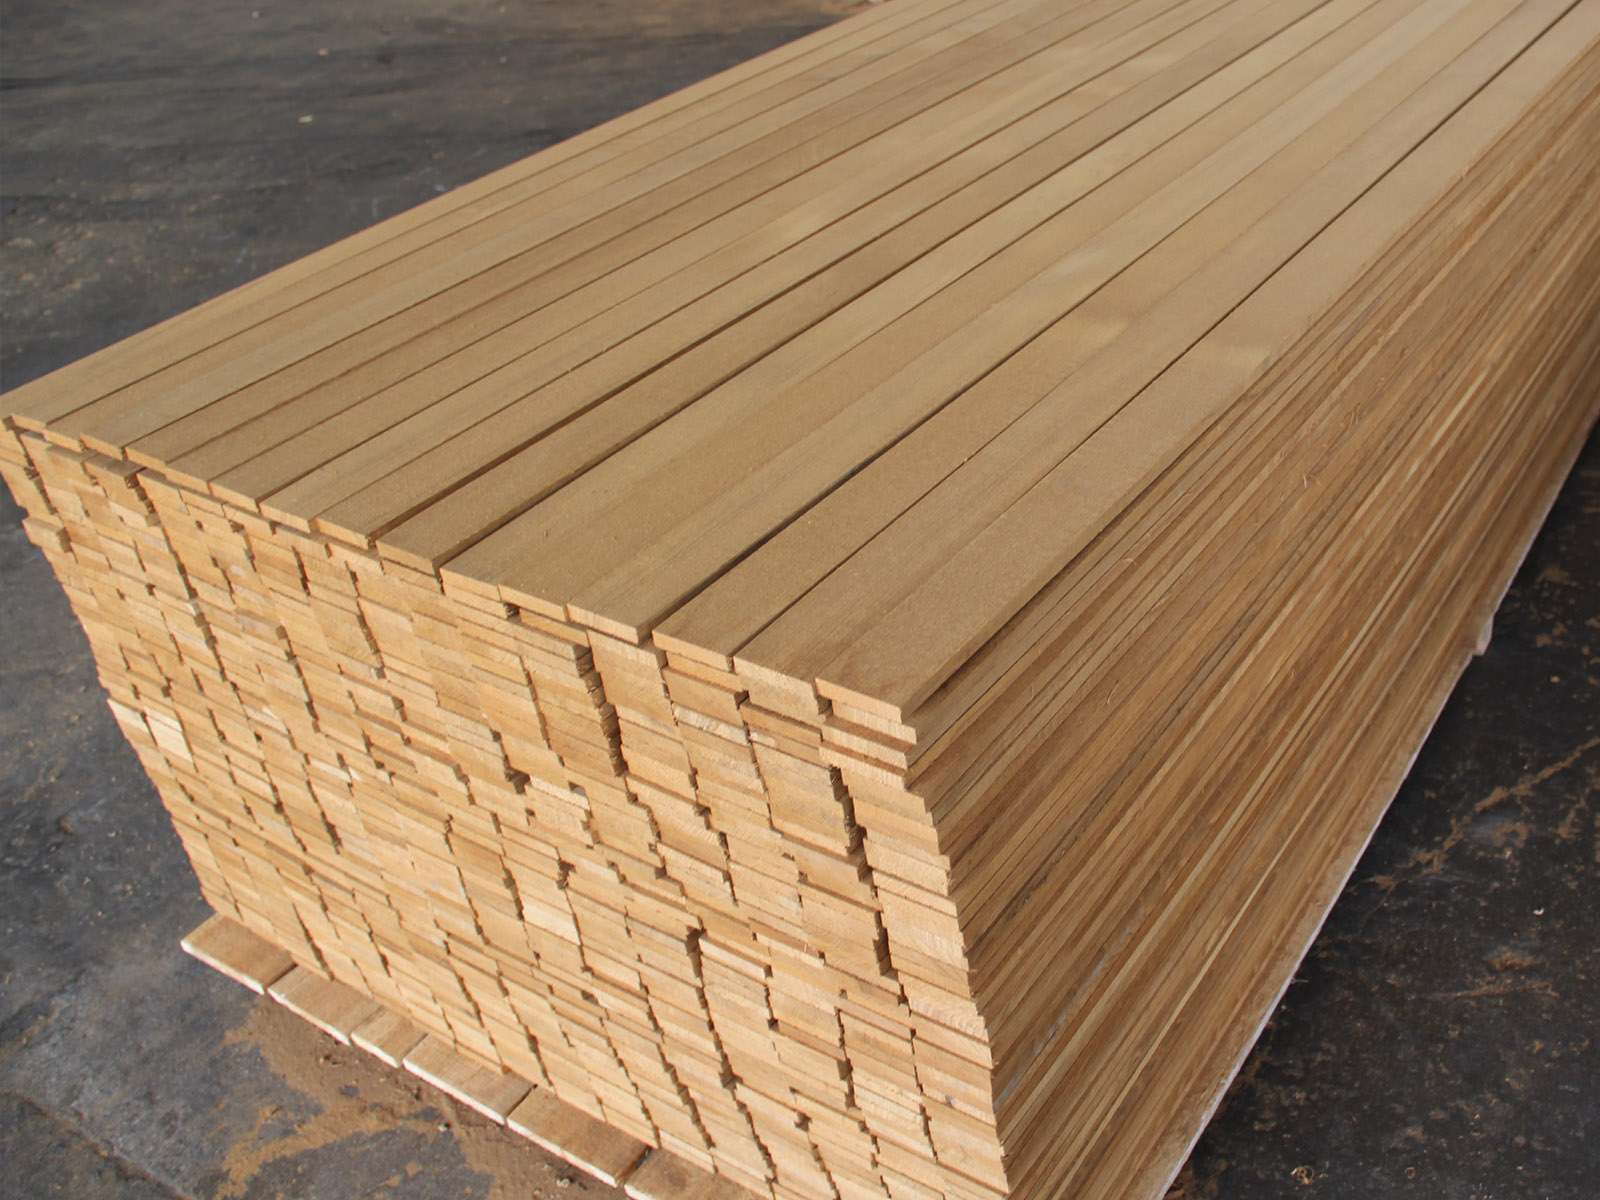 What Makes Teak Planks Resistant to Weather and Decay?